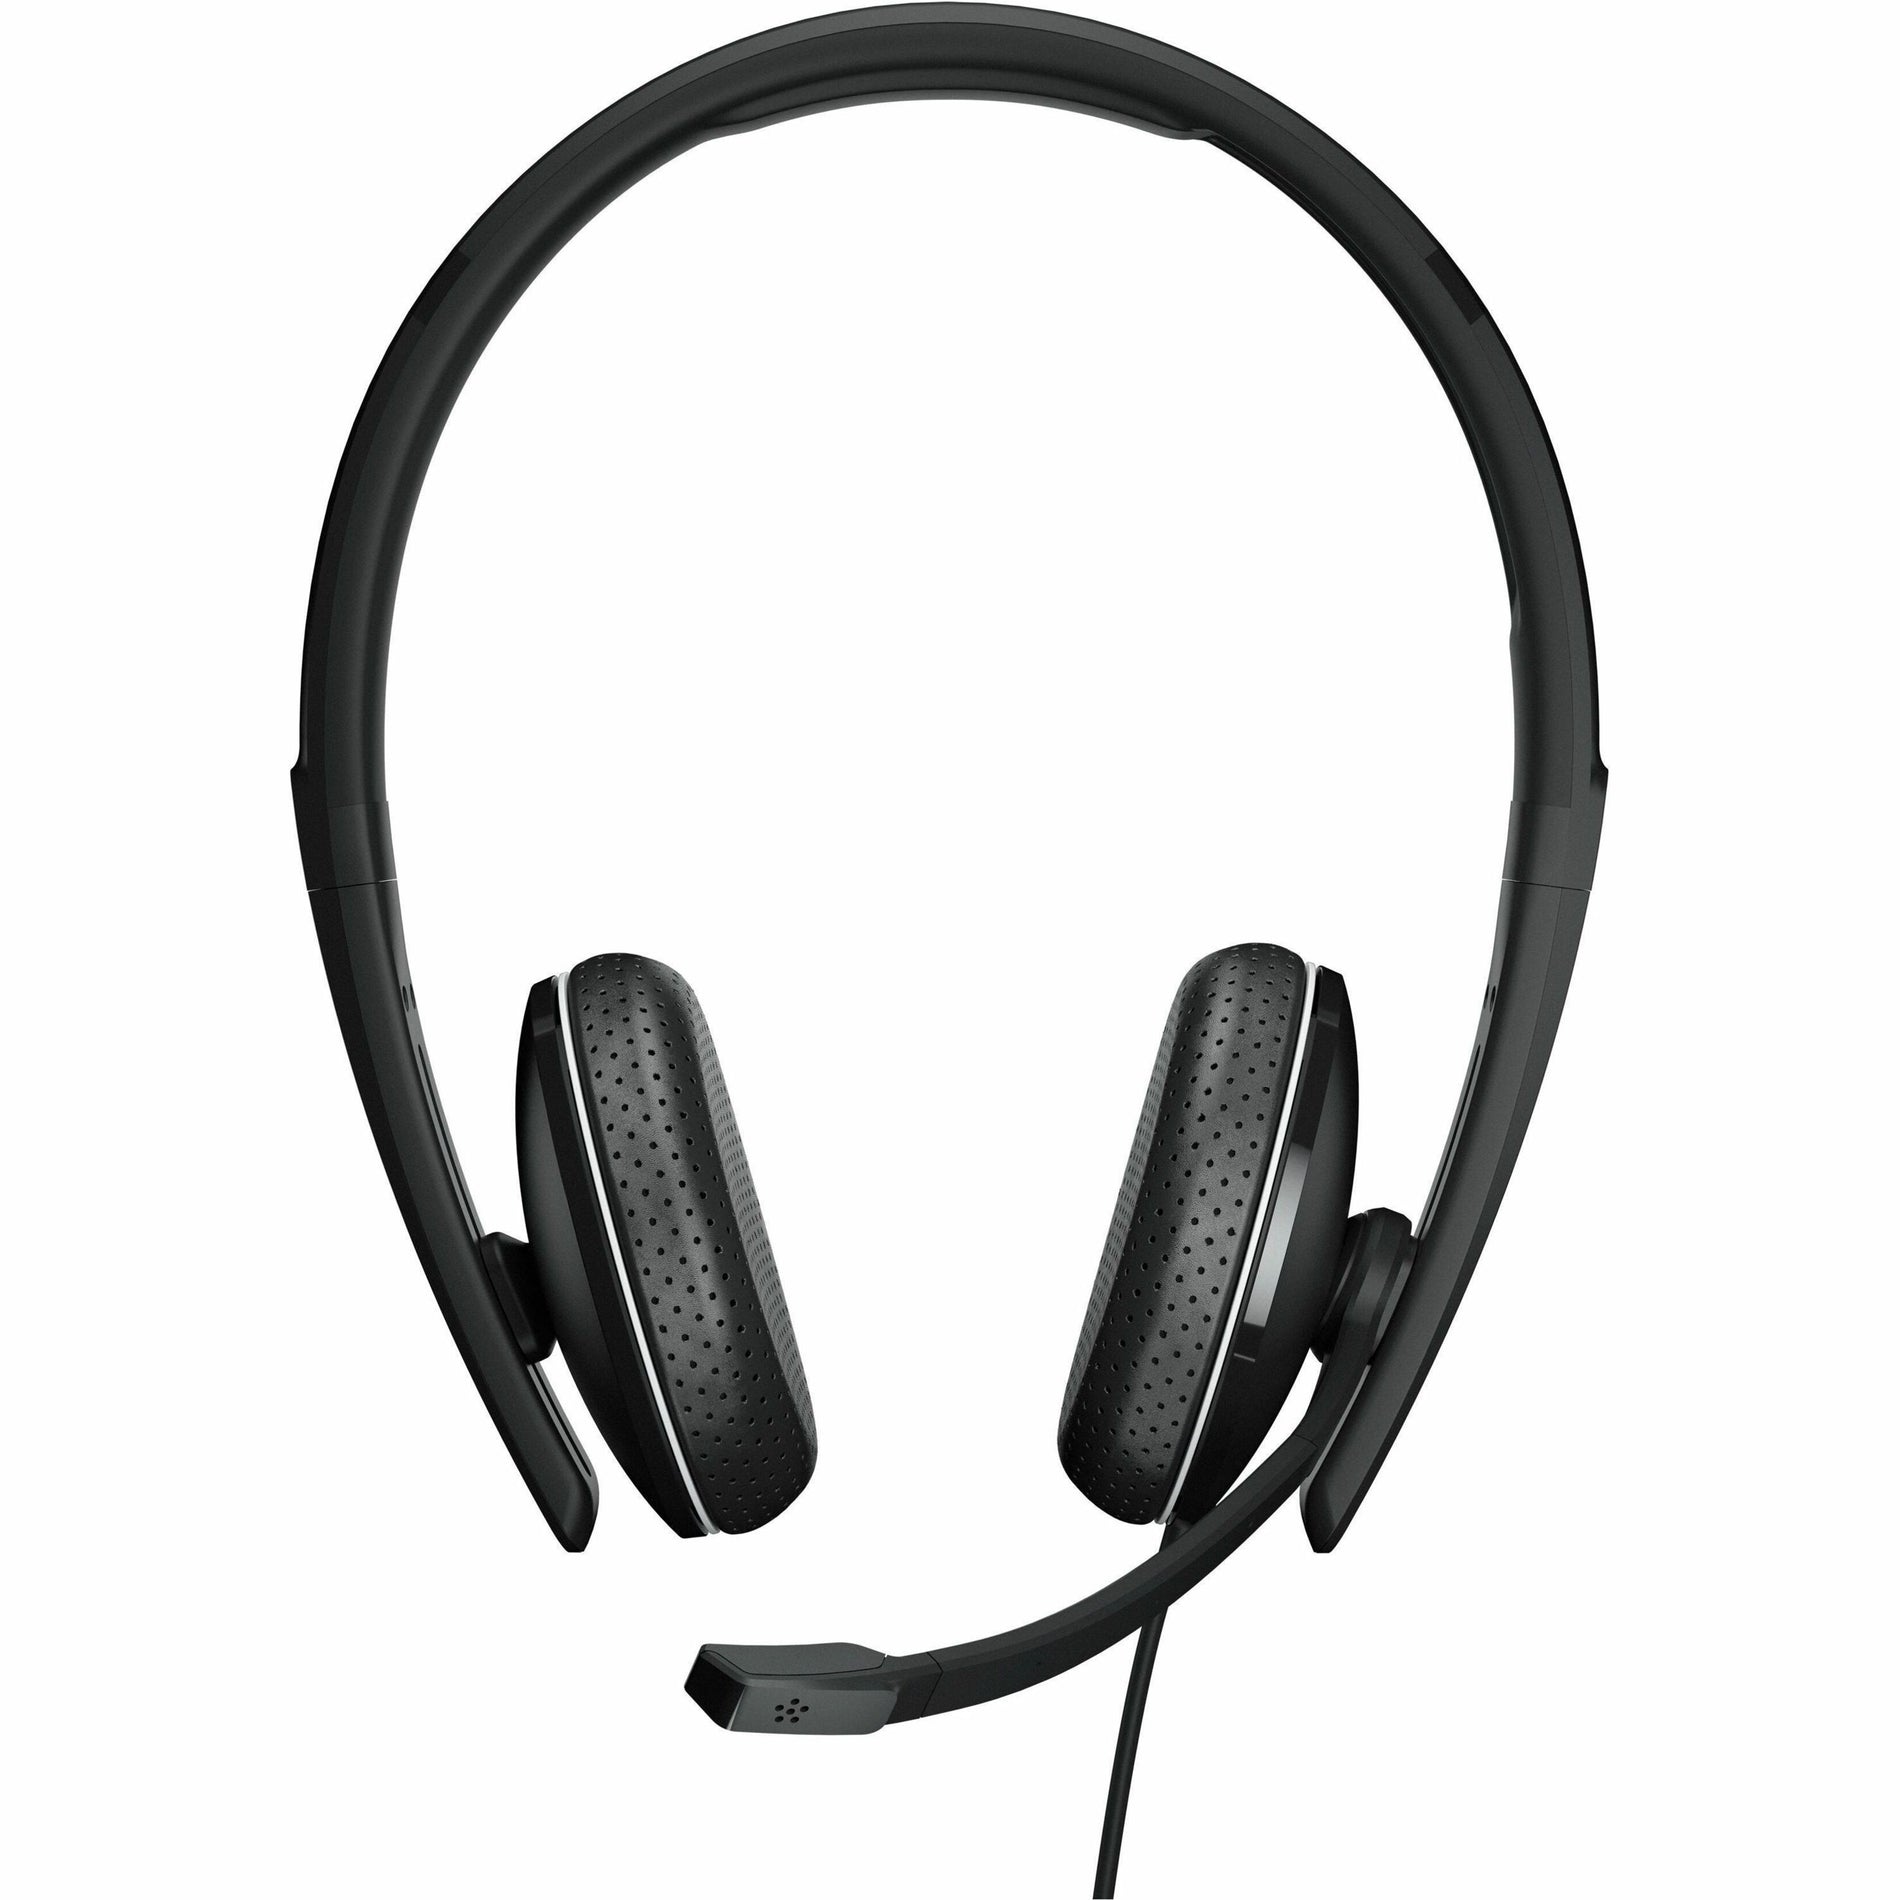 EPOS | SENNHEISER 1000920 ADAPT 165 USB-C II Headset, Binaural On-ear Headset with 2 Year Warranty, Integrated Microphone, Mobile Devices Compatibility